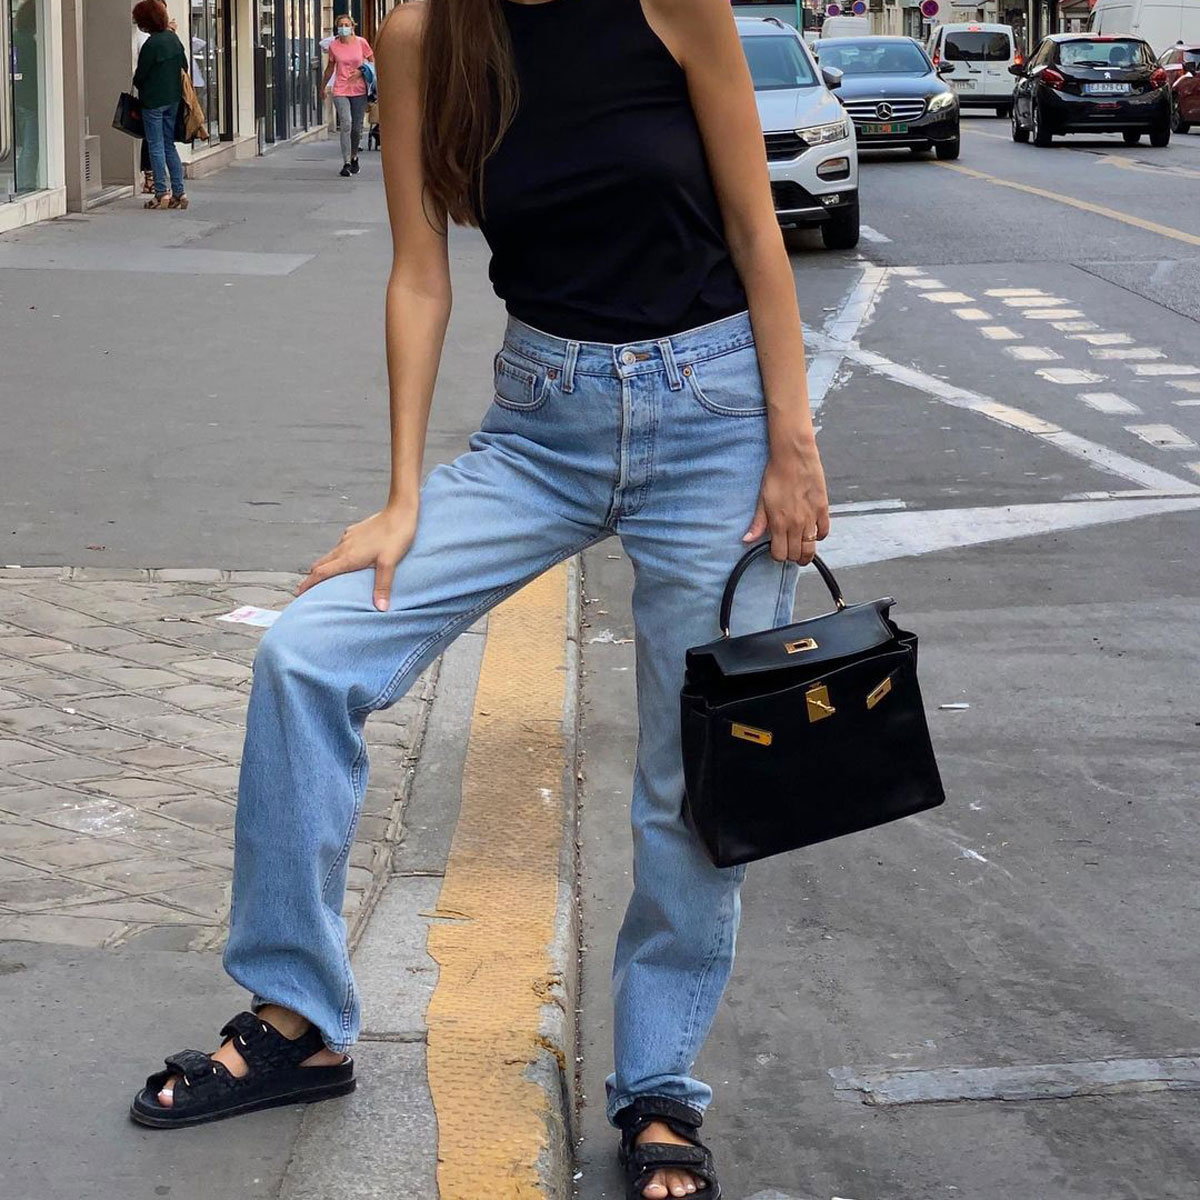 31 Full-Length Jeans That Actually Cover My Damn Ankles